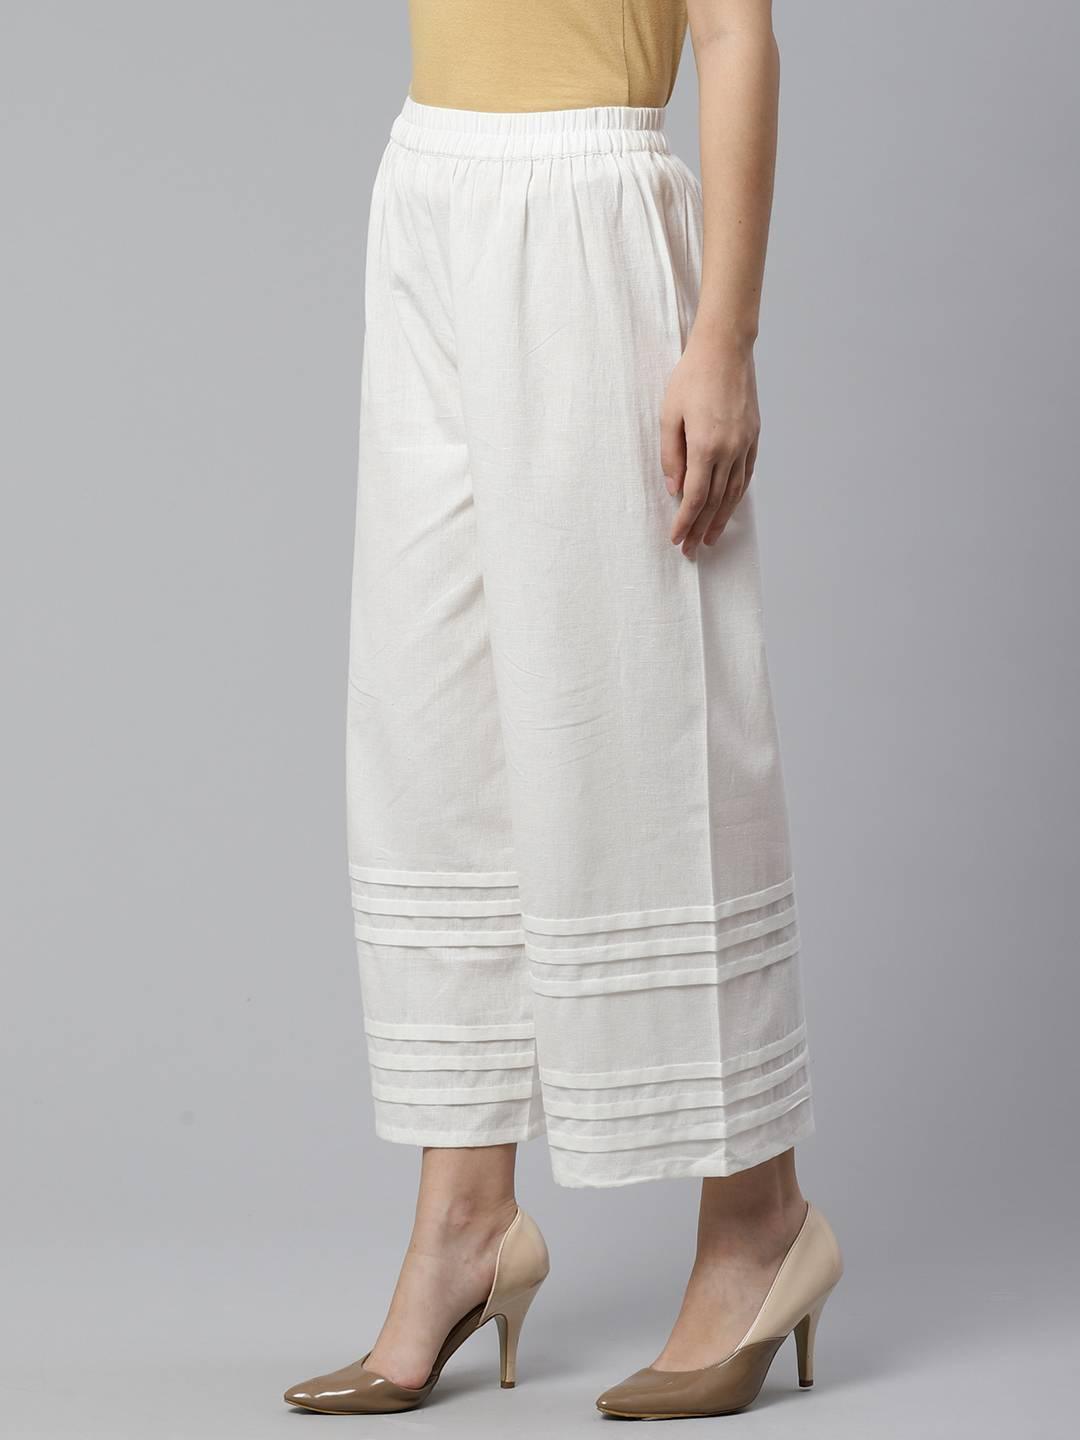 Off-White Solid Cotton Palazzos - Libas